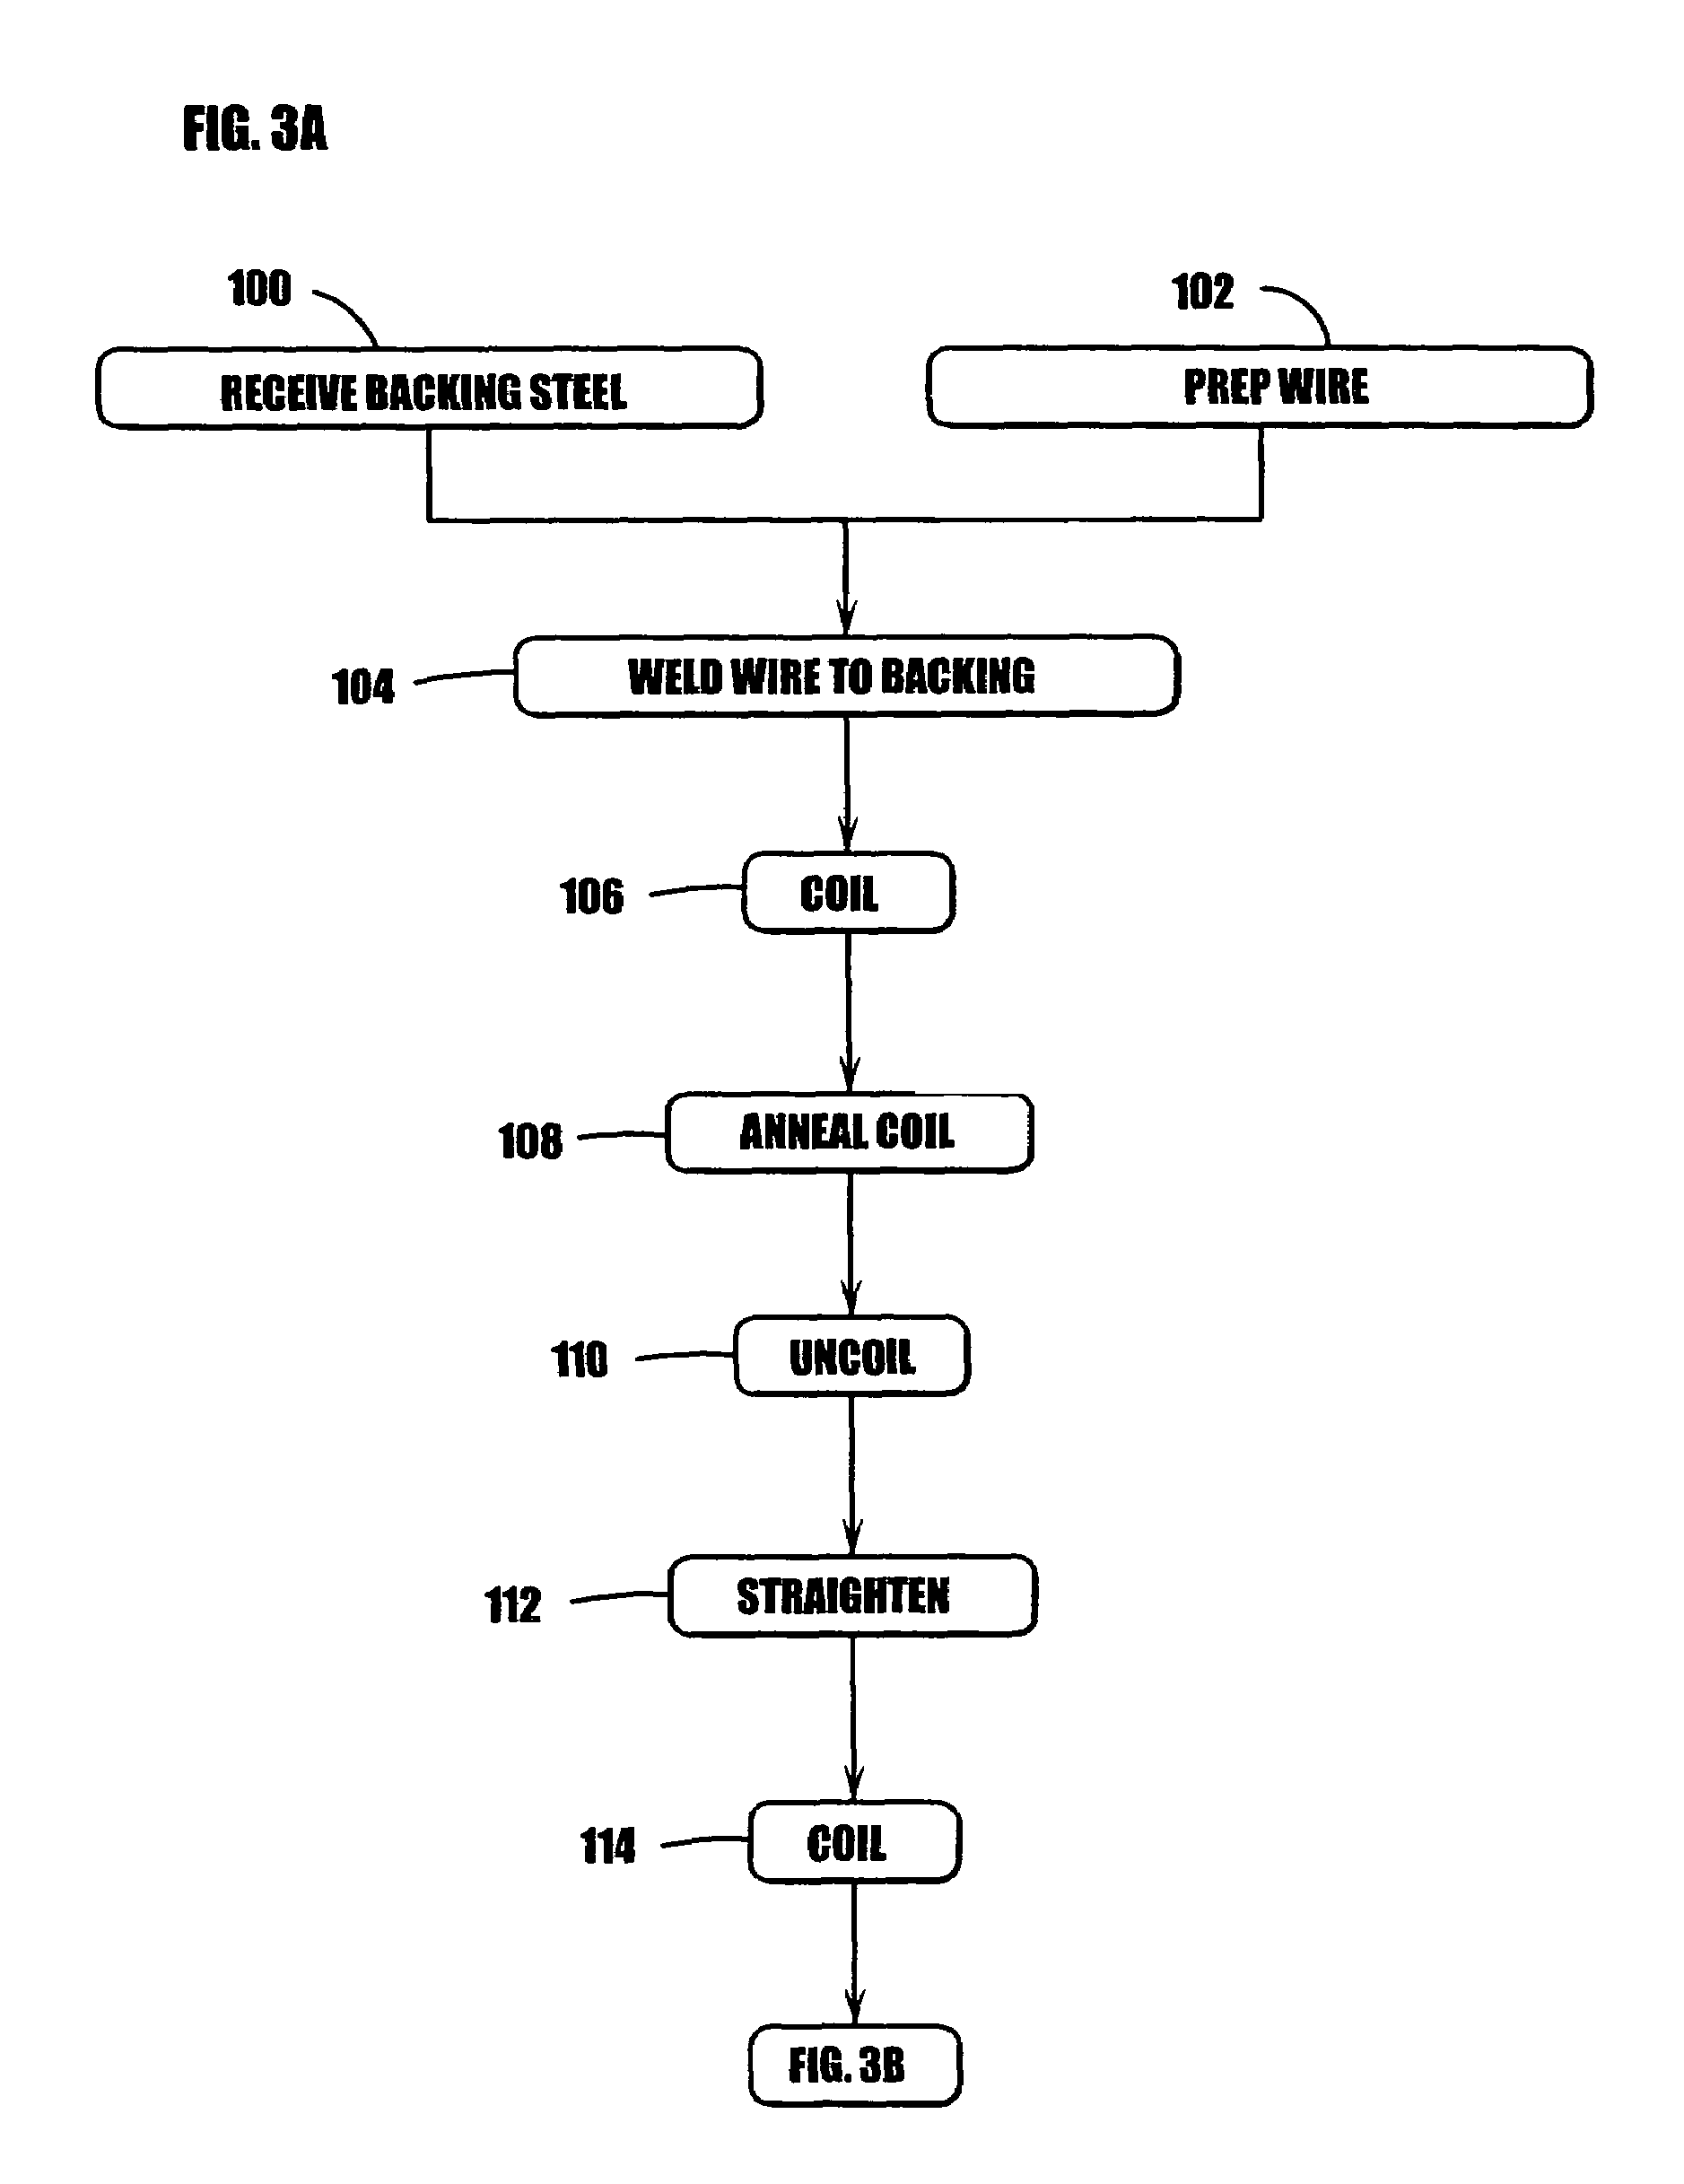 Composite utility blade, and method of making such a blade